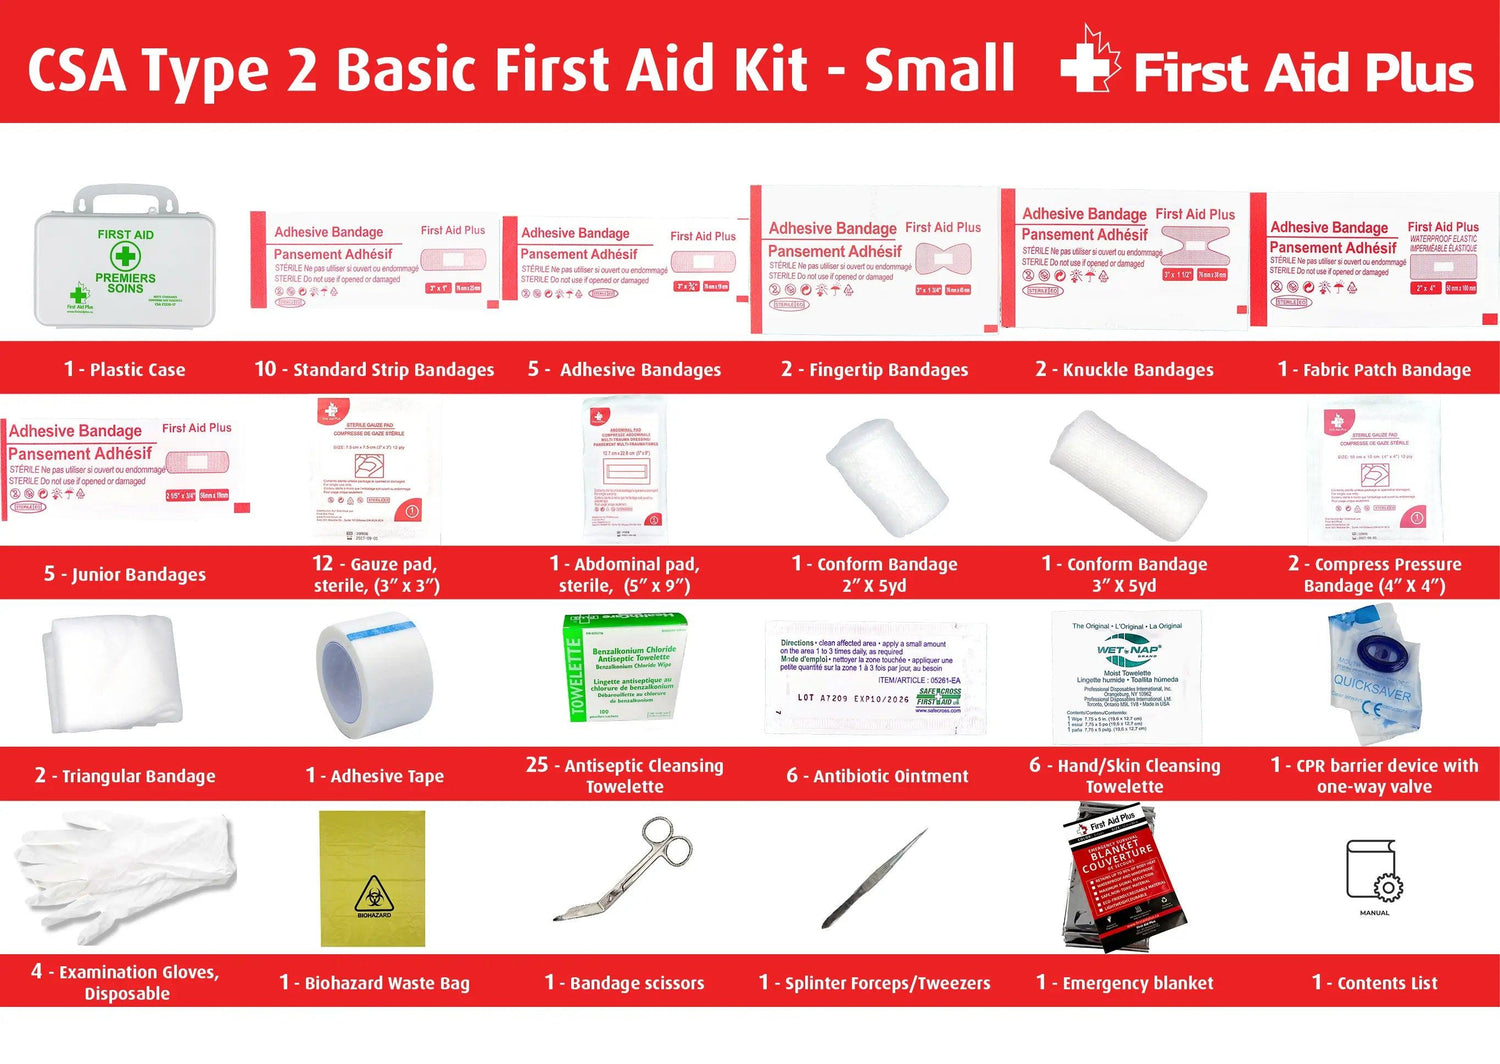 CSA Type 2 Basic First Aid Kit - Small (2-25 Workers) - First Aid Plus